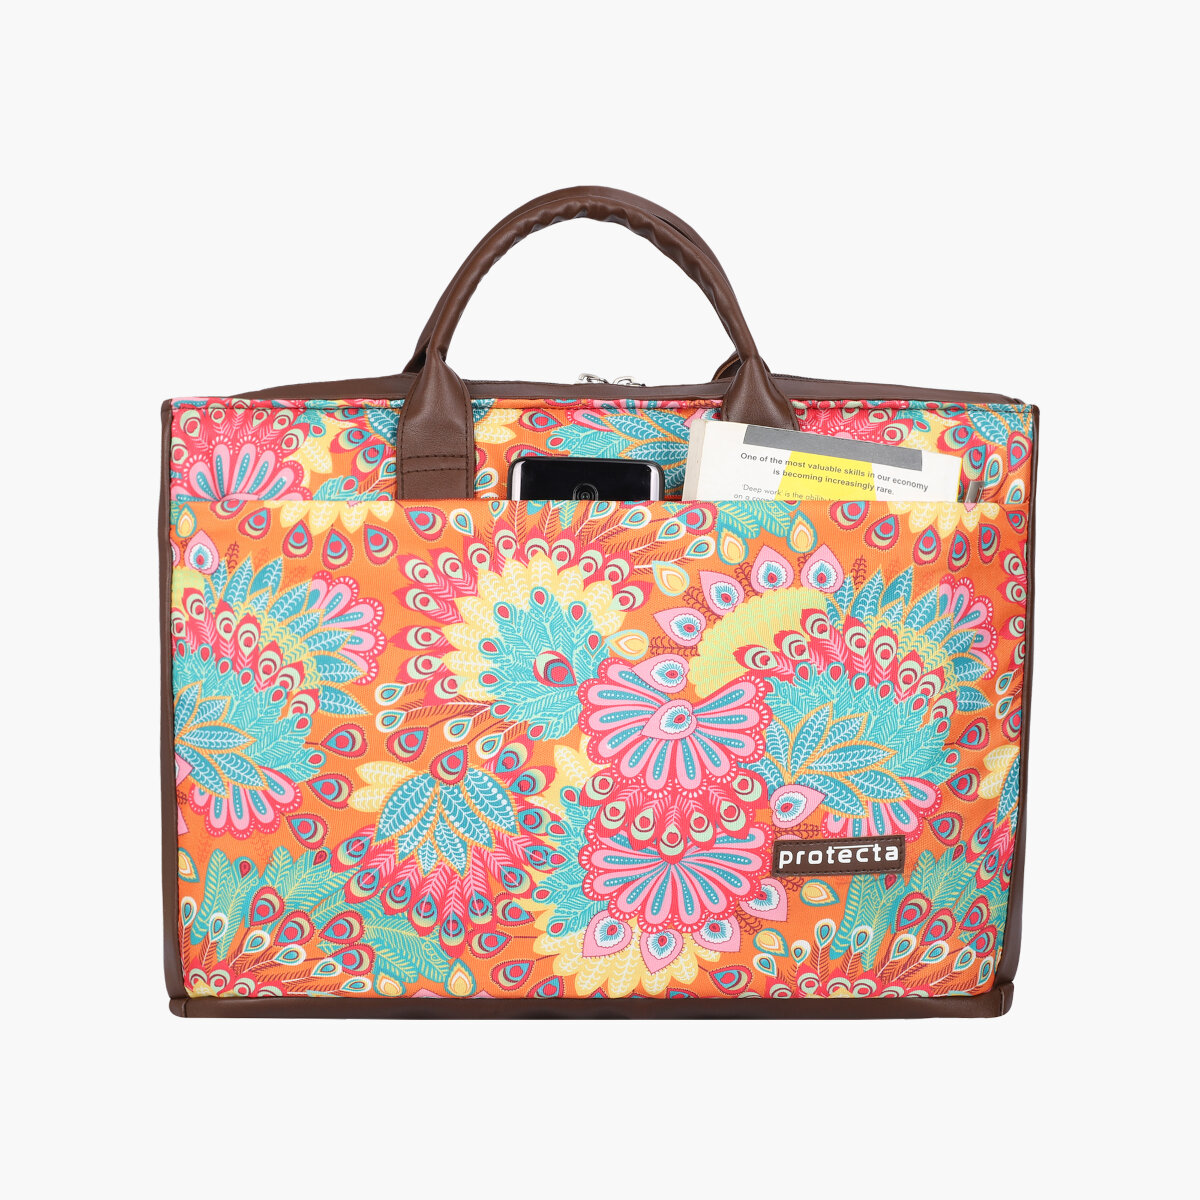 Paisley Print | Protecta Evenly Poised Office Laptop Bag for Women - 6